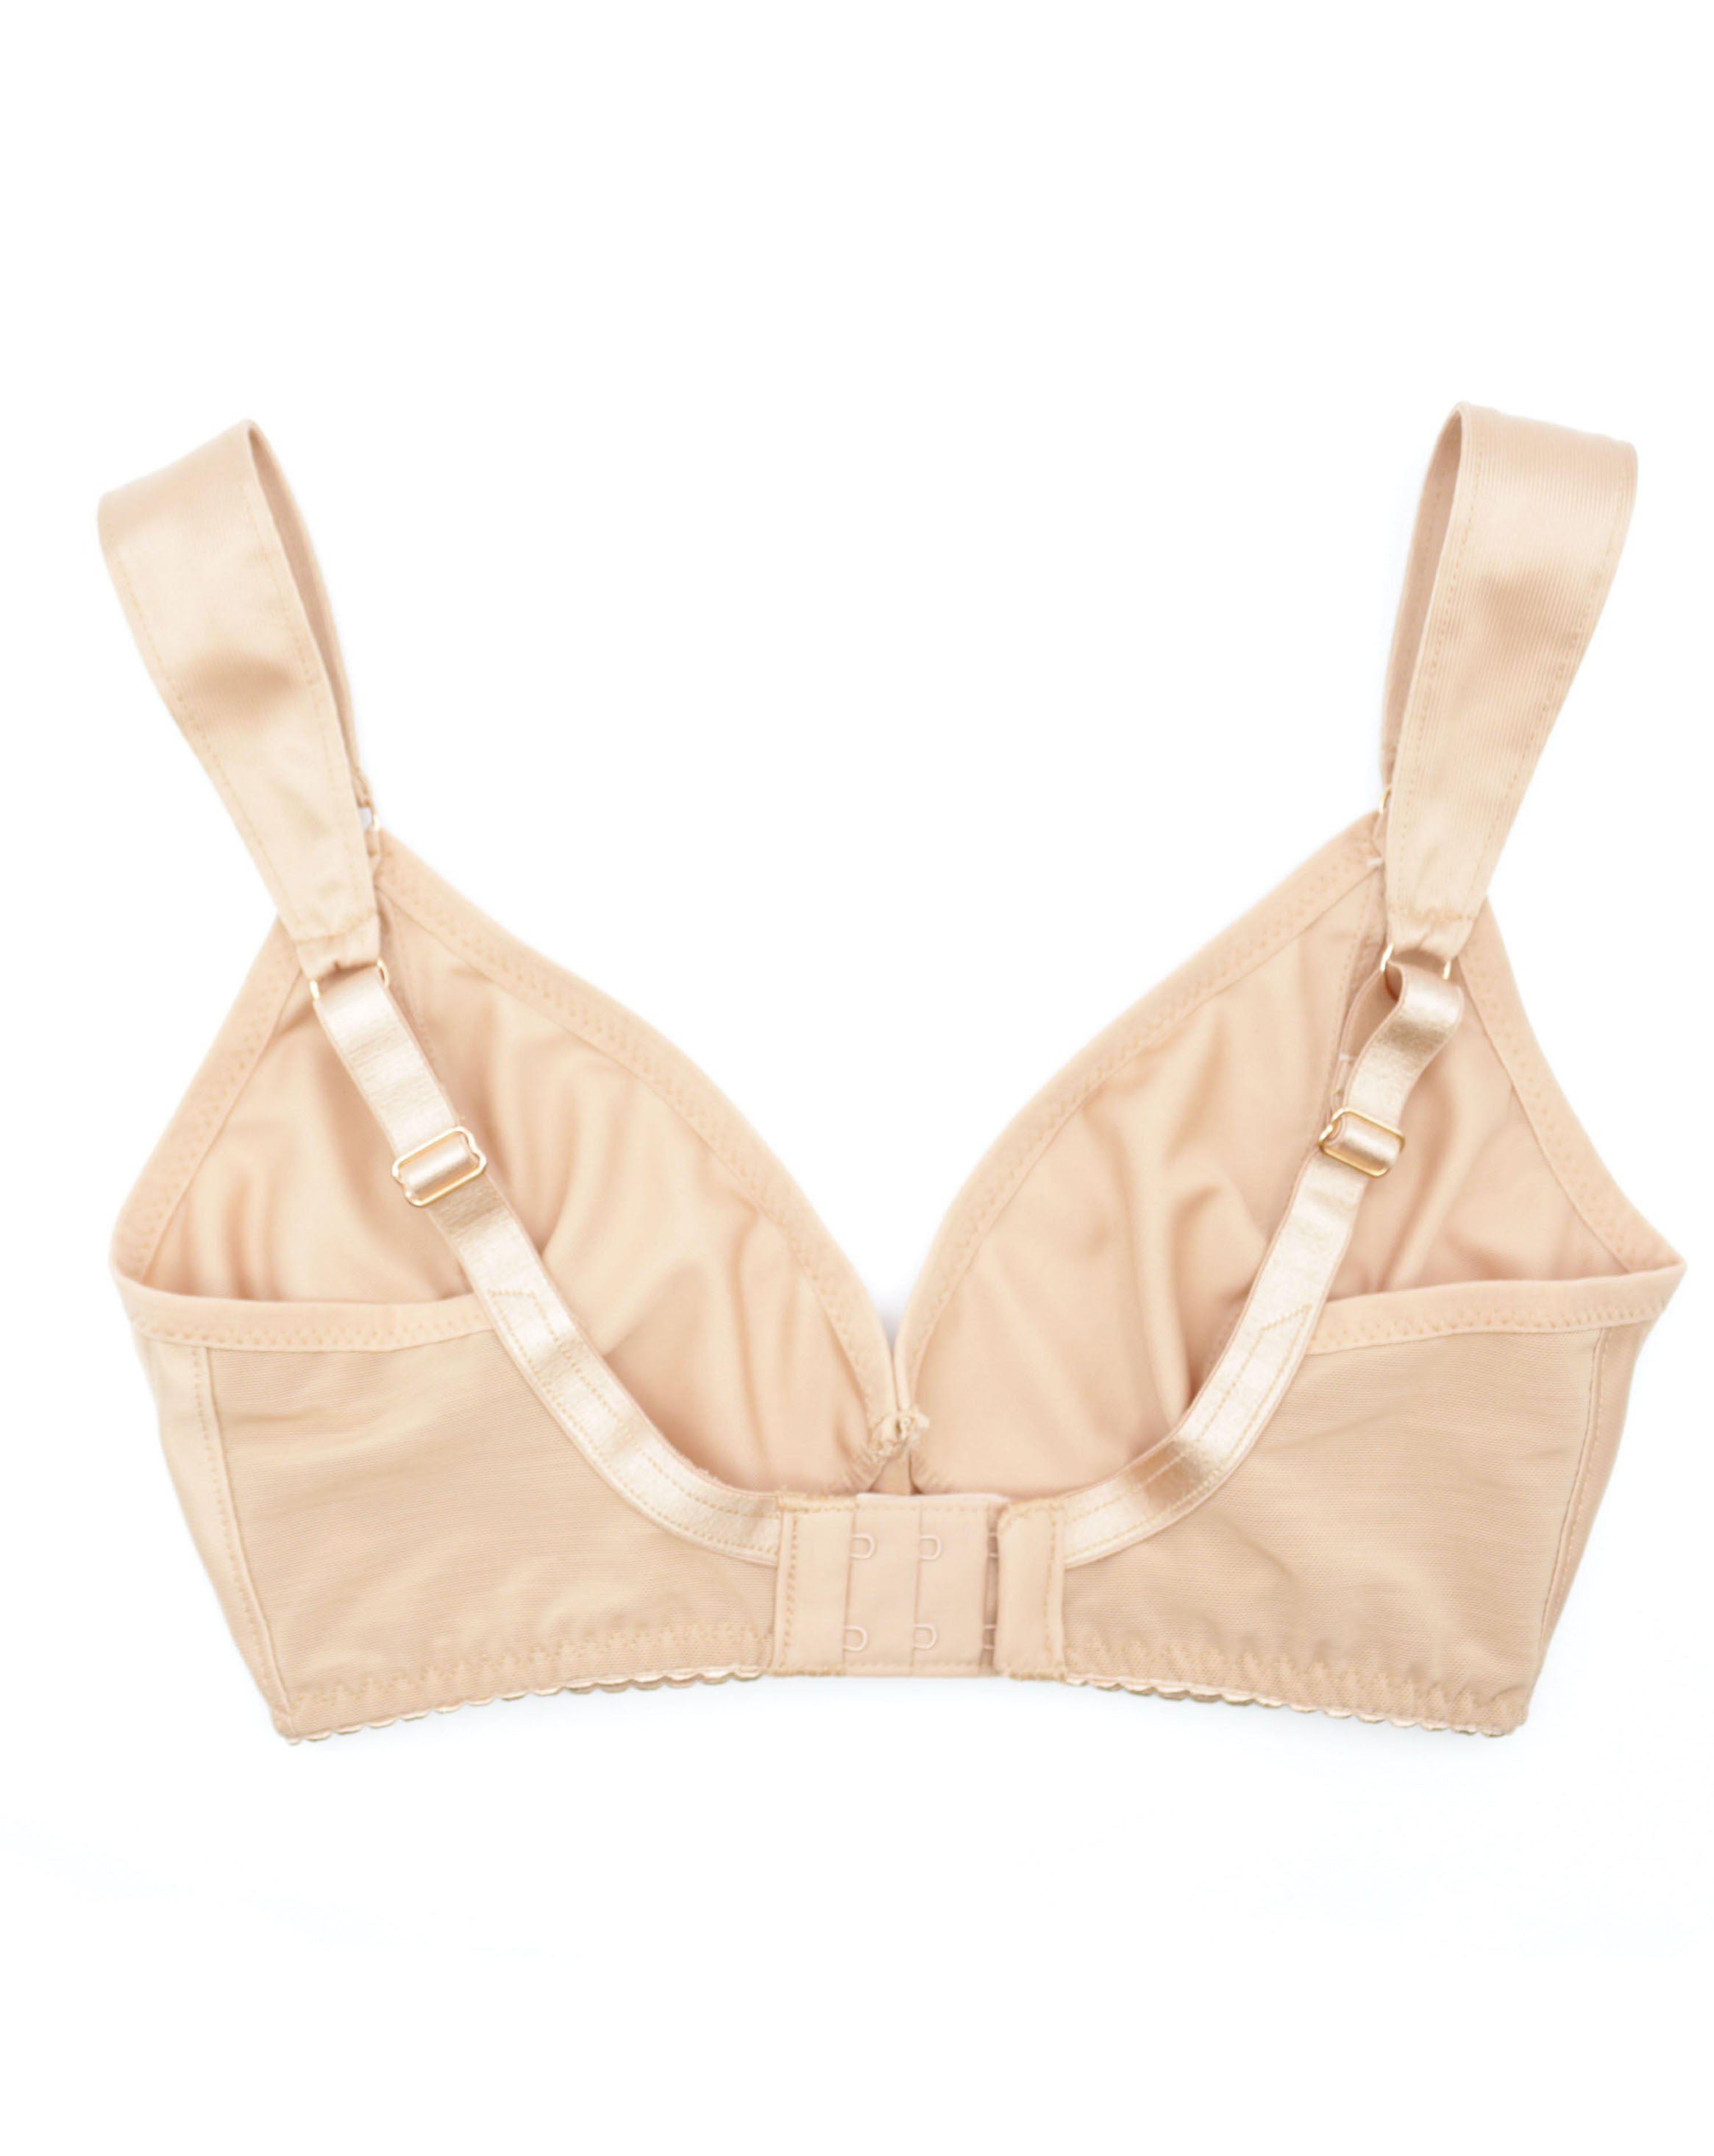 Back view of a custom made wireless bra in minimal solid beige color/colour made to order by Rubies Bras.